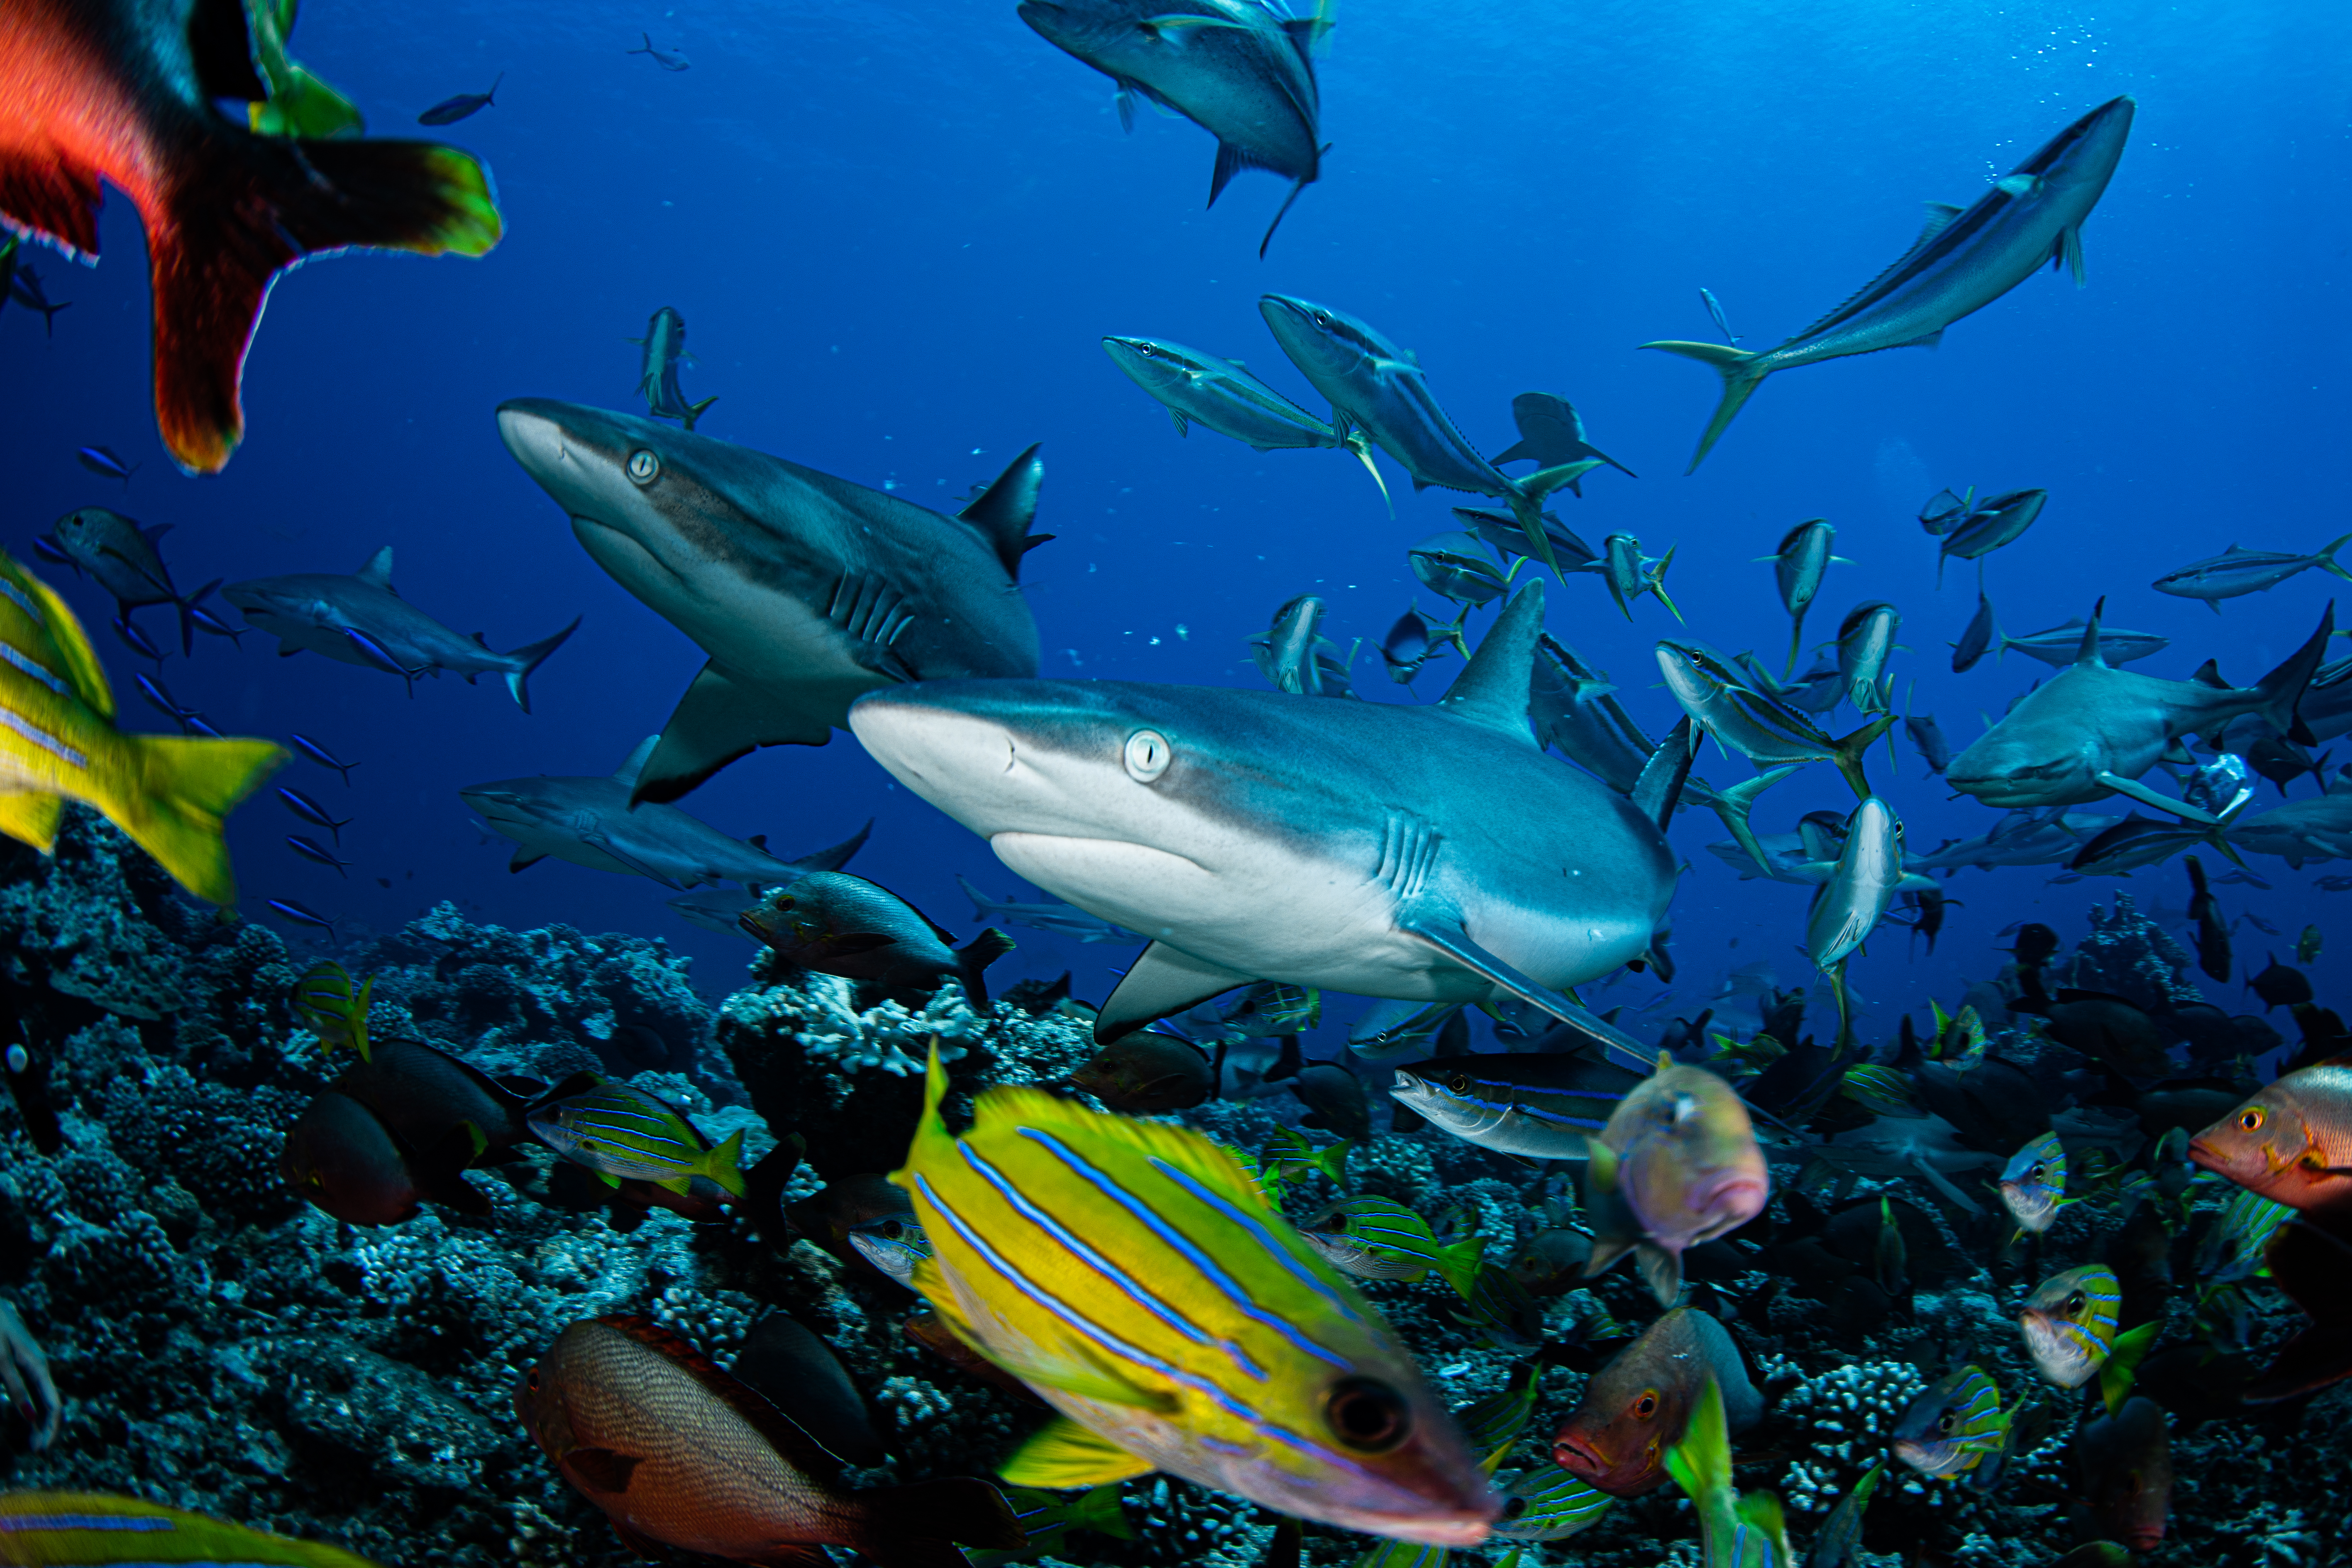 Photo of school of fish with shark